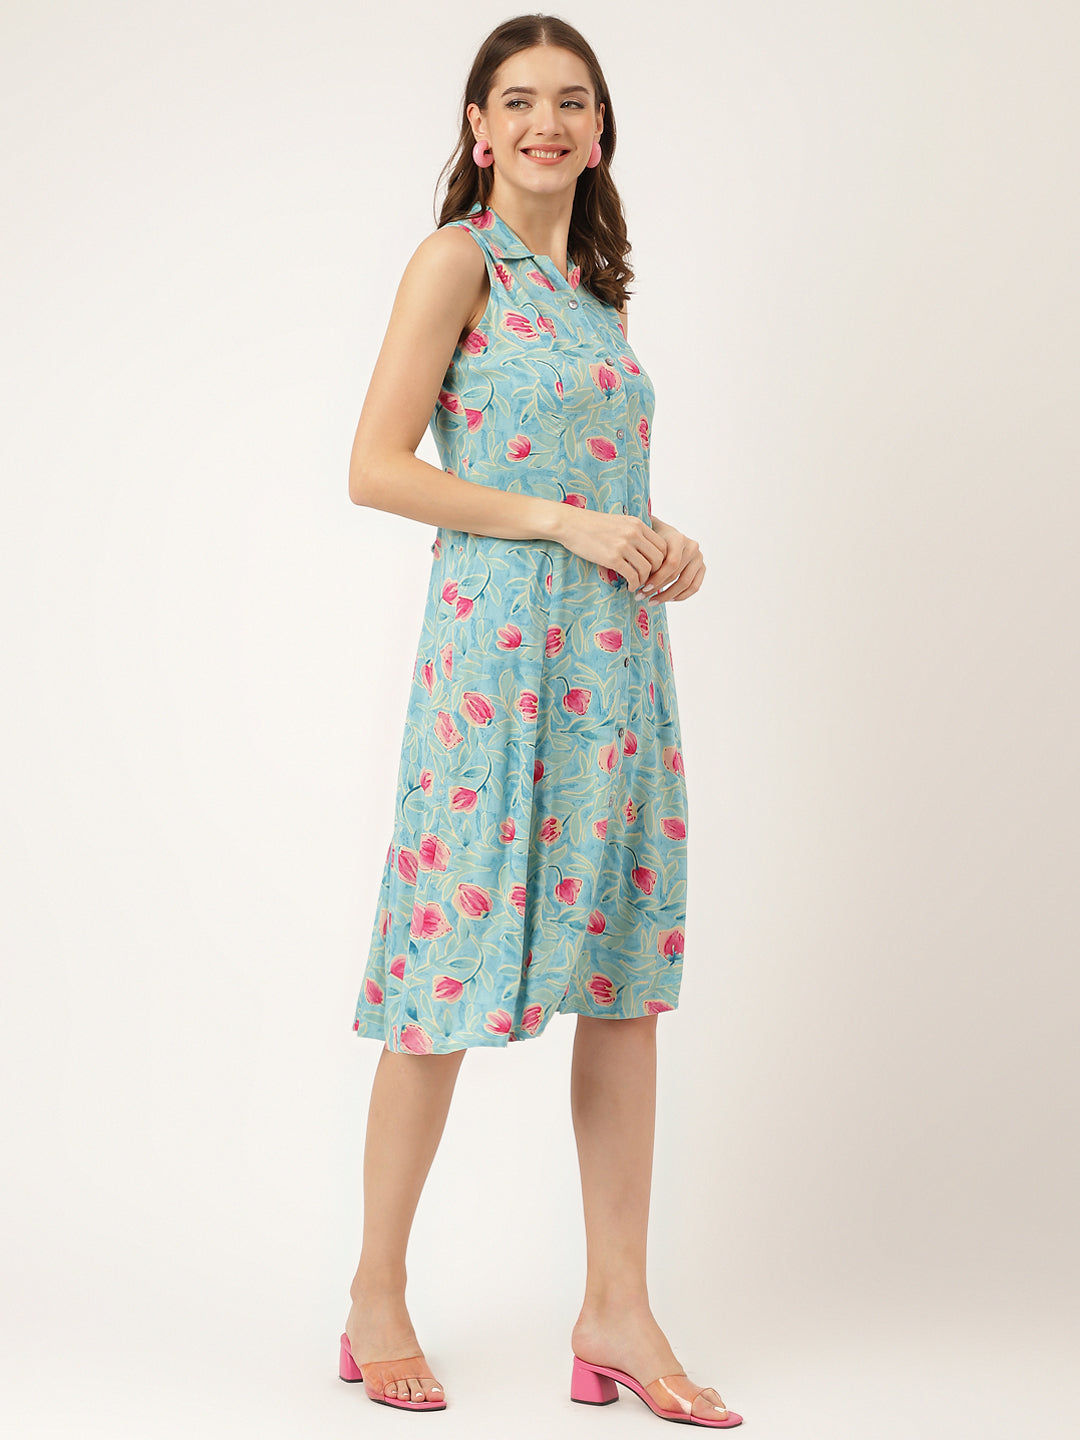 Divena Blue Floral Print Rayon A-Line Midi Dress with Attached Sleeves for Women